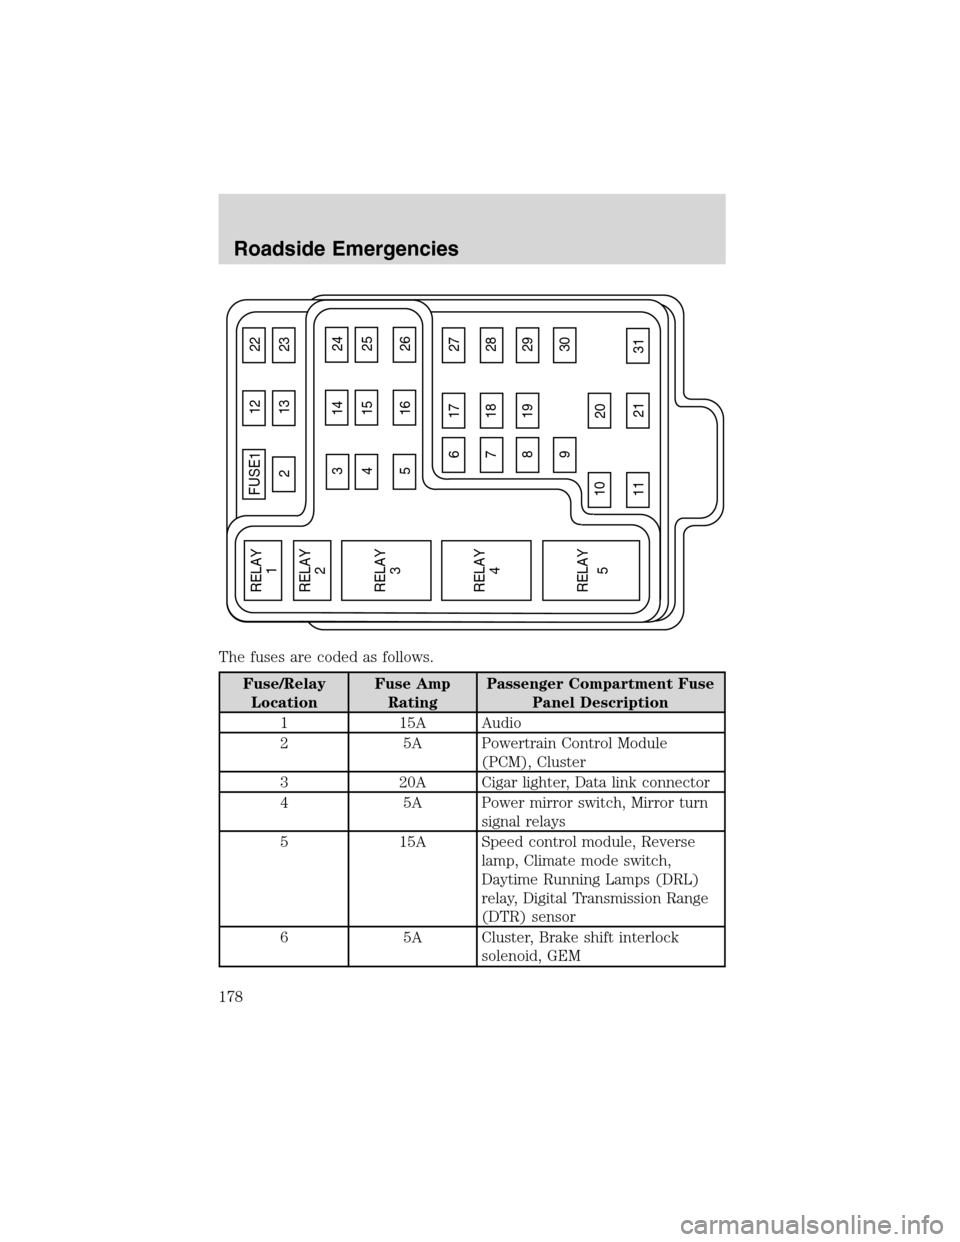 FORD F150 2003 10.G Owners Manual The fuses are coded as follows.
Fuse/Relay
LocationFuse Amp
RatingPassenger Compartment Fuse
Panel Description
1 15A Audio
2 5A Powertrain Control Module
(PCM), Cluster
3 20A Cigar lighter, Data link 